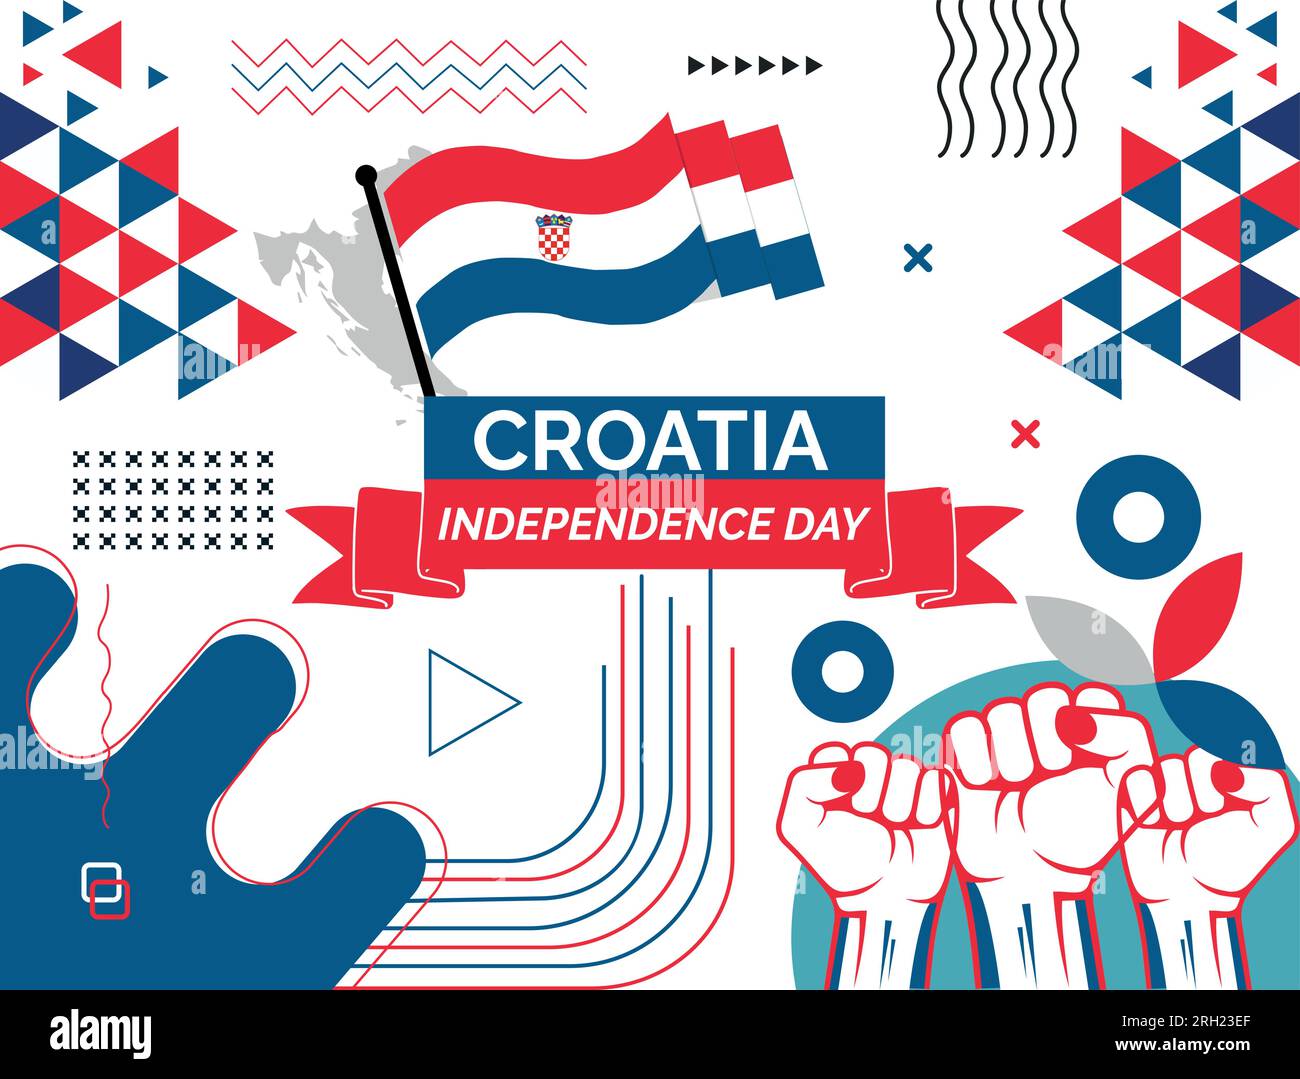 Croatia Map and raised fists. National day or Independence day design for Croatia celebration. Modern retro design with abstract icons. Vector Stock Vector